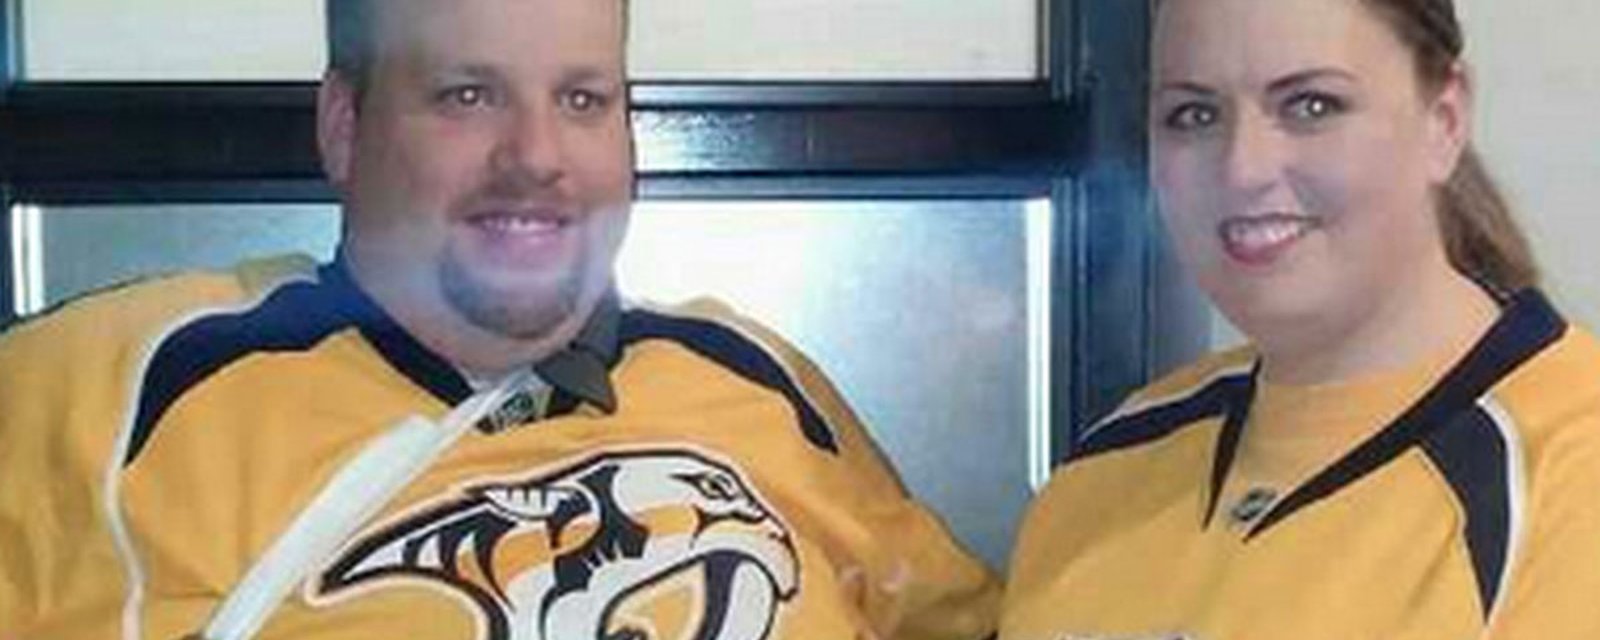 Breaking: Preds mourn the passing of one of their biggest fans